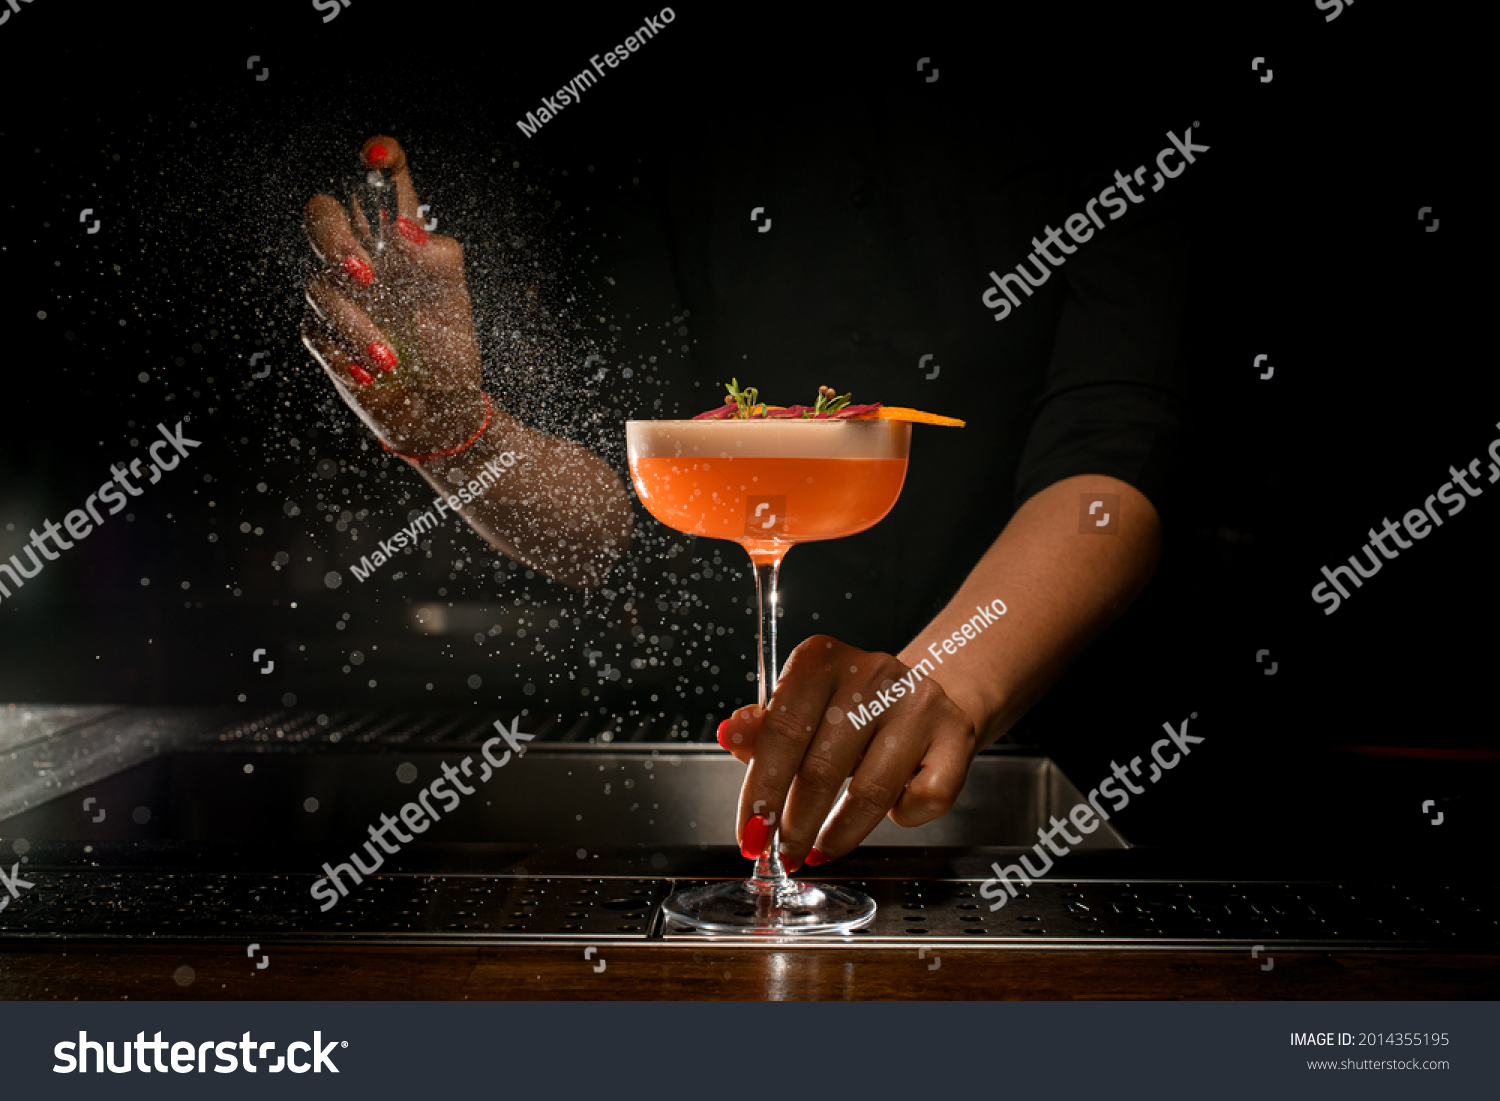 direct view of glass with bright delicious frothy cocktail that woman bartender holds with her hand and sprinkles on it. A lot of drops around #2014355195